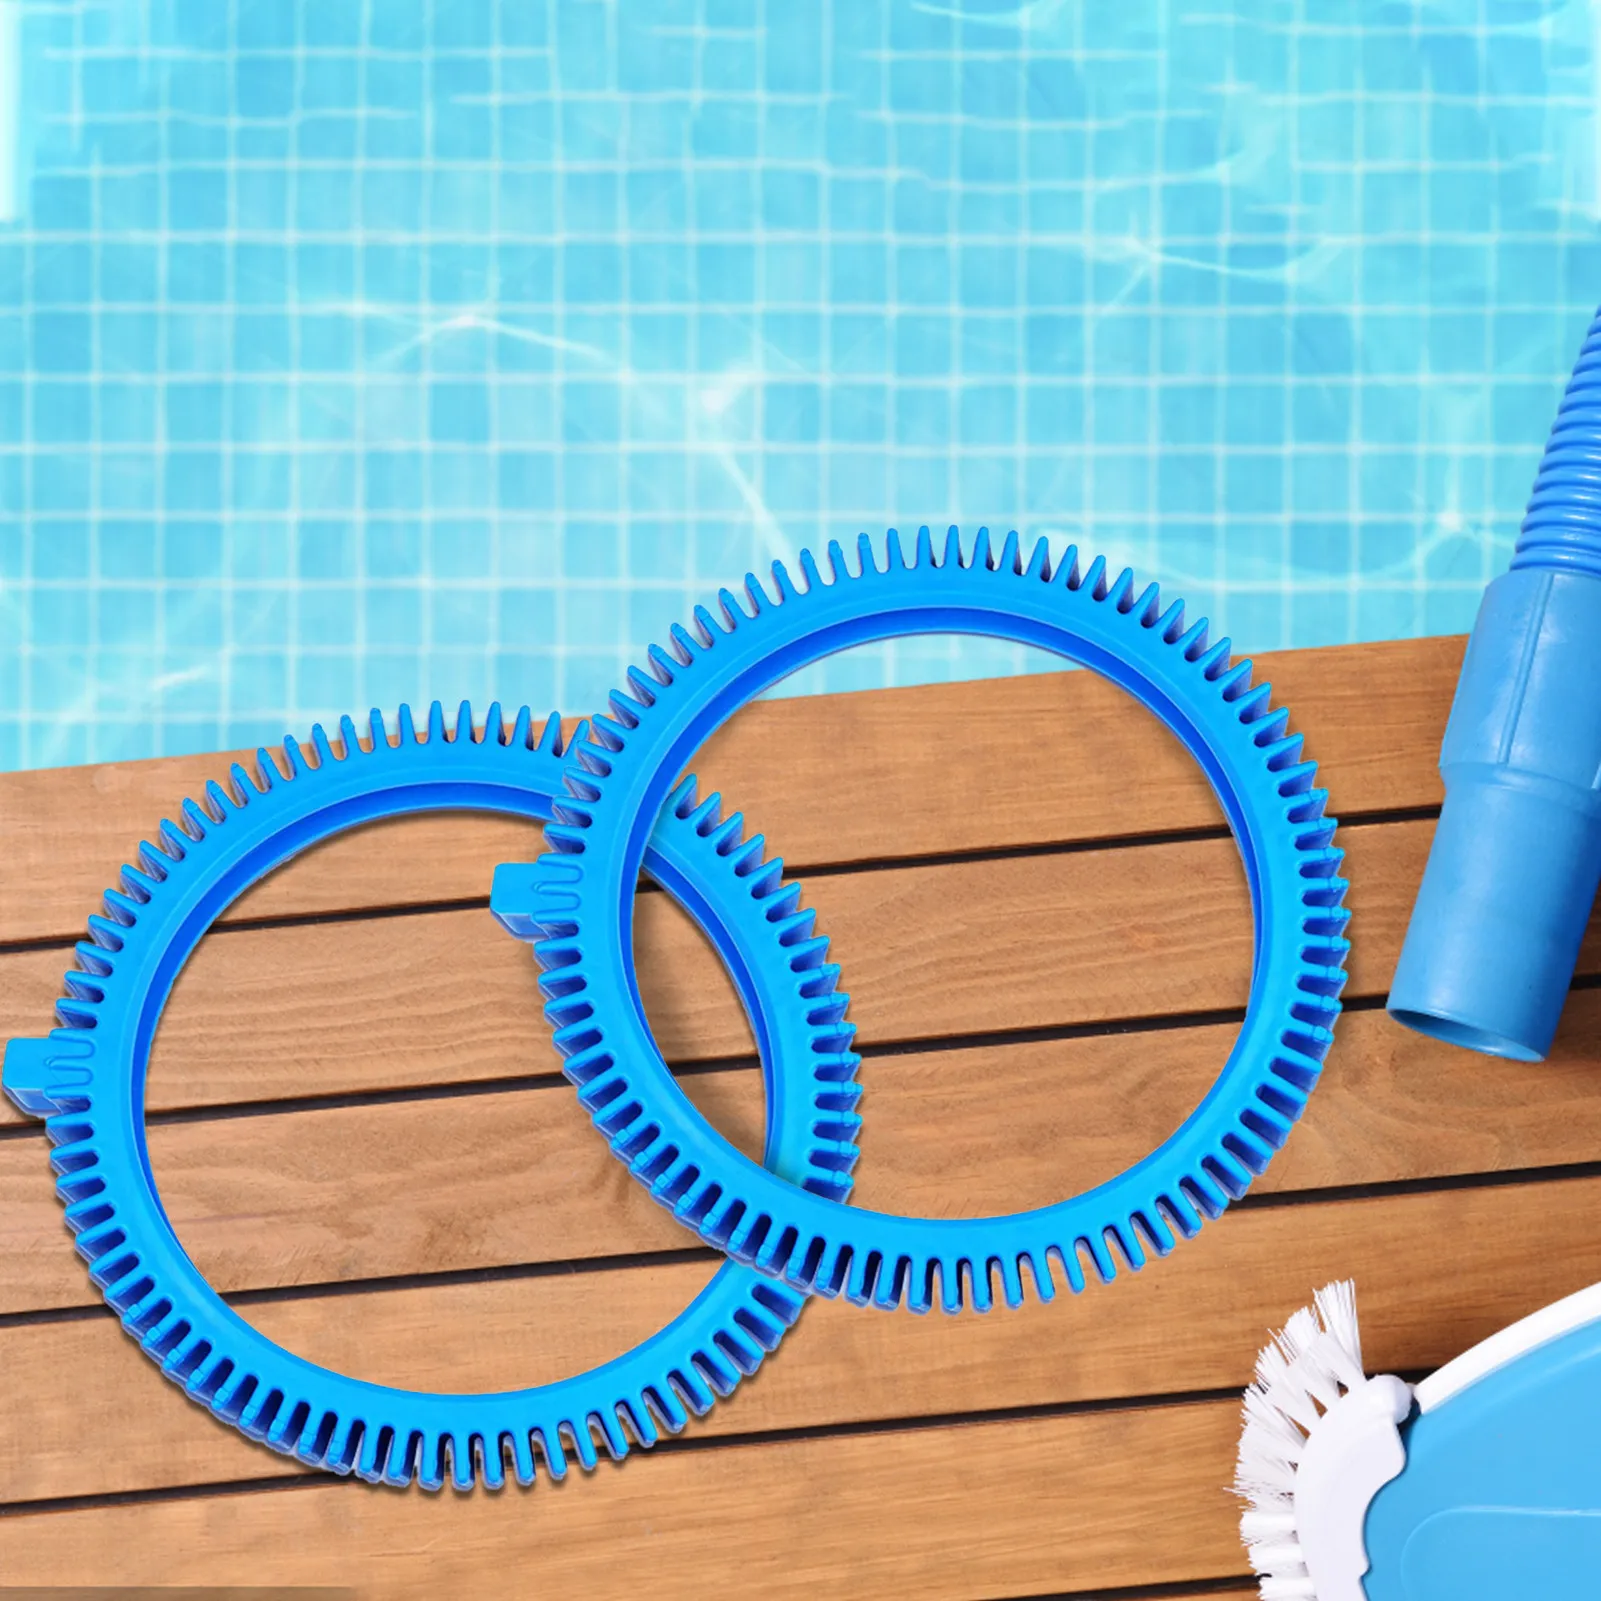 

Front Tire Tape Blue Pool Cleaner Parts With Super Hump Haywood Pololtnuegen Select 896584000-143 For Pool Cleaners 2X 4X And